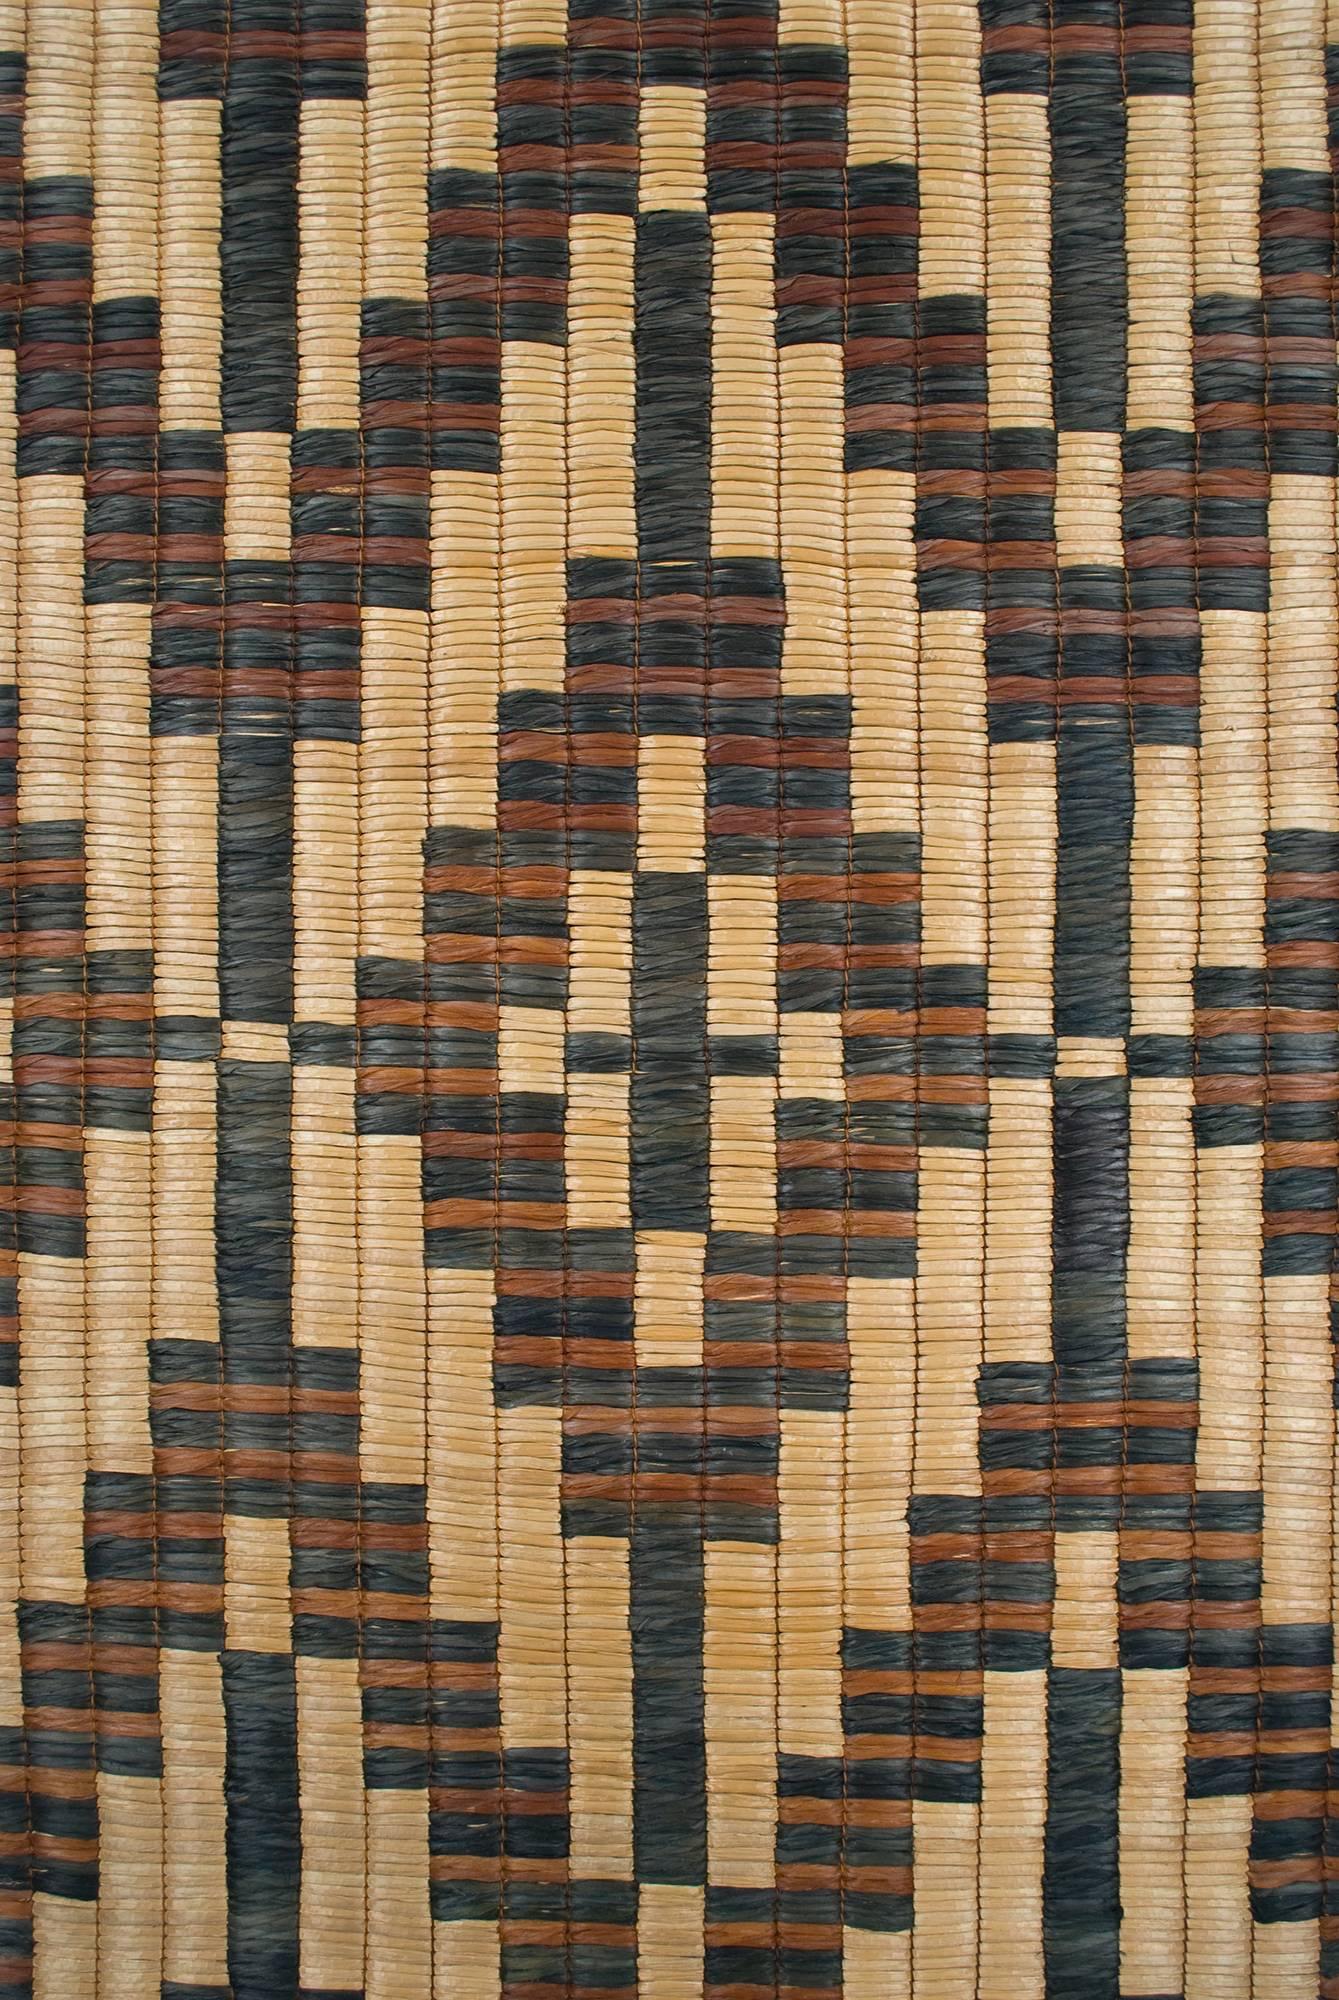 Offered by John Ruddy
Woven mat, Ainu culture, Hokkaido, northern Japan, 20th century.

This woven mat is made of bulrush and dune grass, and would likely have been used as insulation along the interior walls of an Ainu home.
  